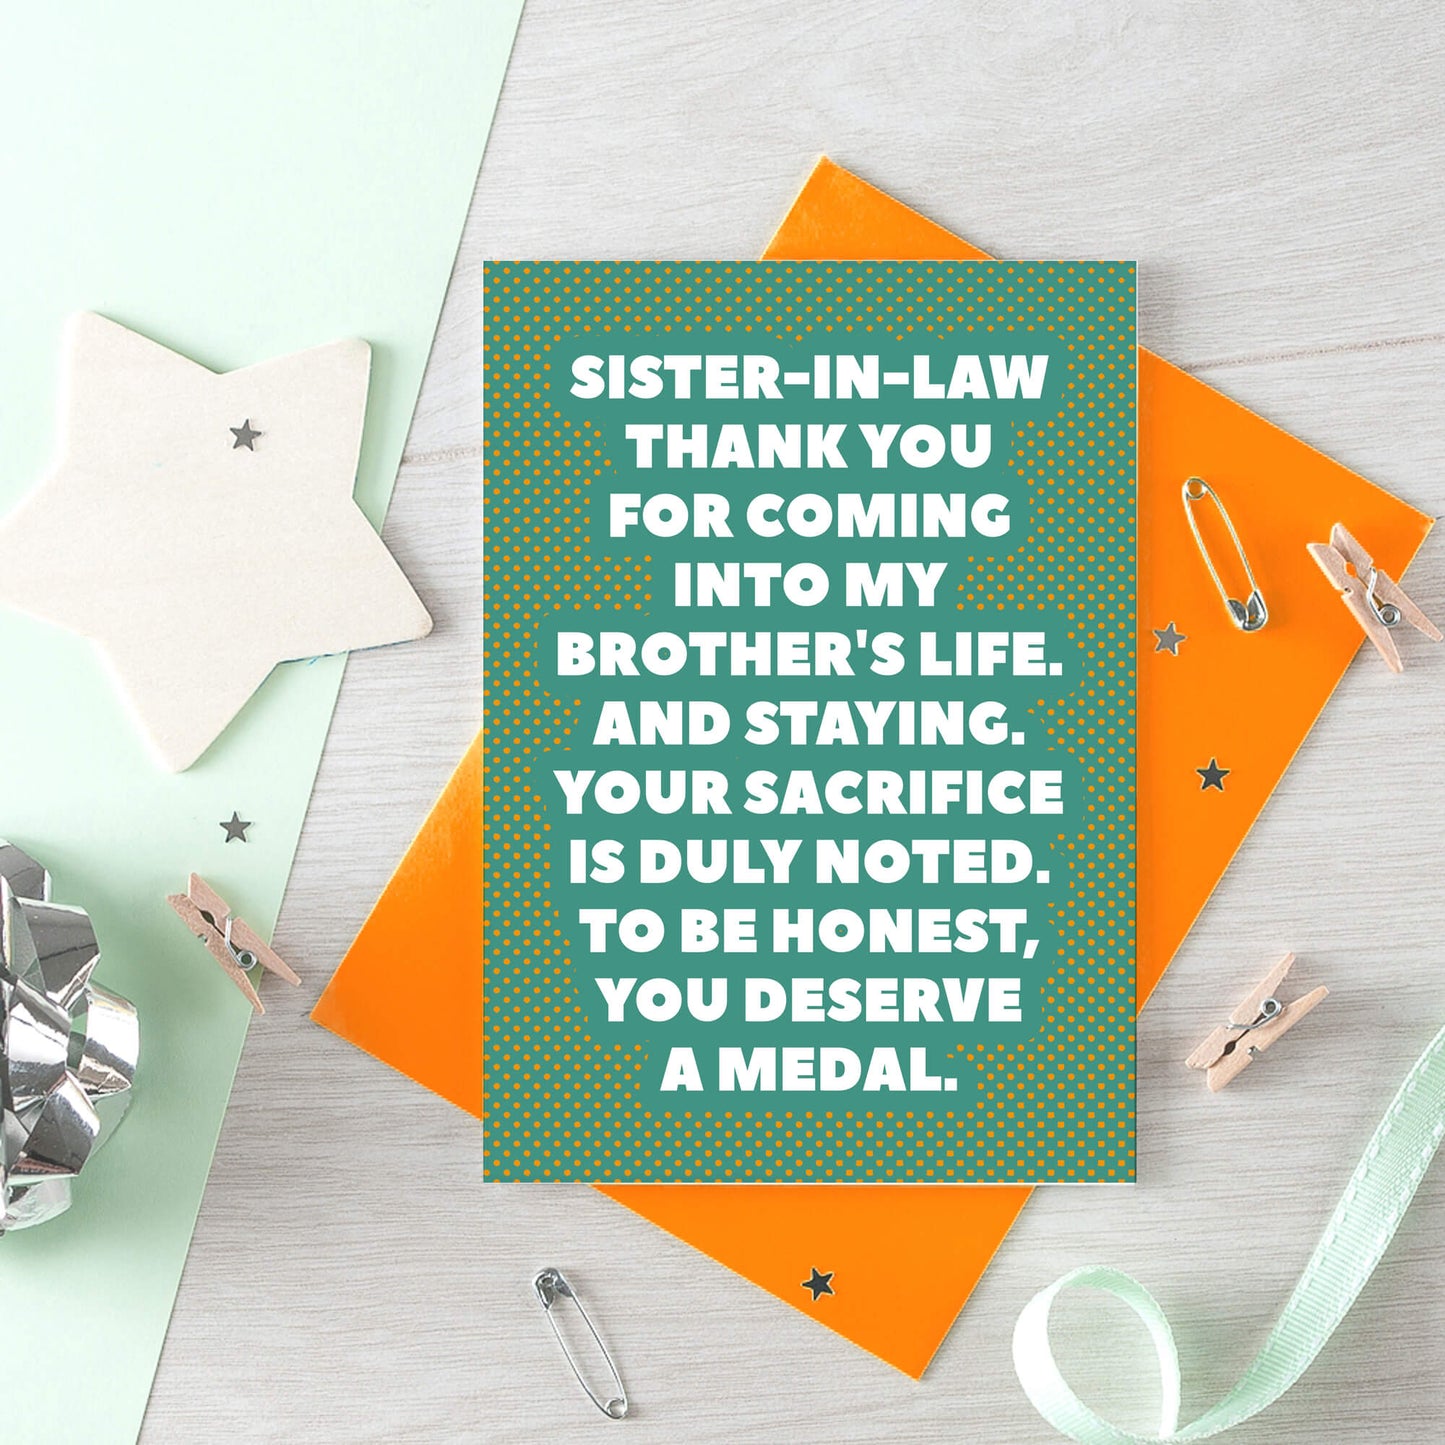 Sister-in-Law Card by SixElevenCreations. Reads Sister-in-law Thank you for coming into my brother's life. And staying. Your sacrifice is duly noted. To be honest, you deserve a medal. Product Code SE2705A6